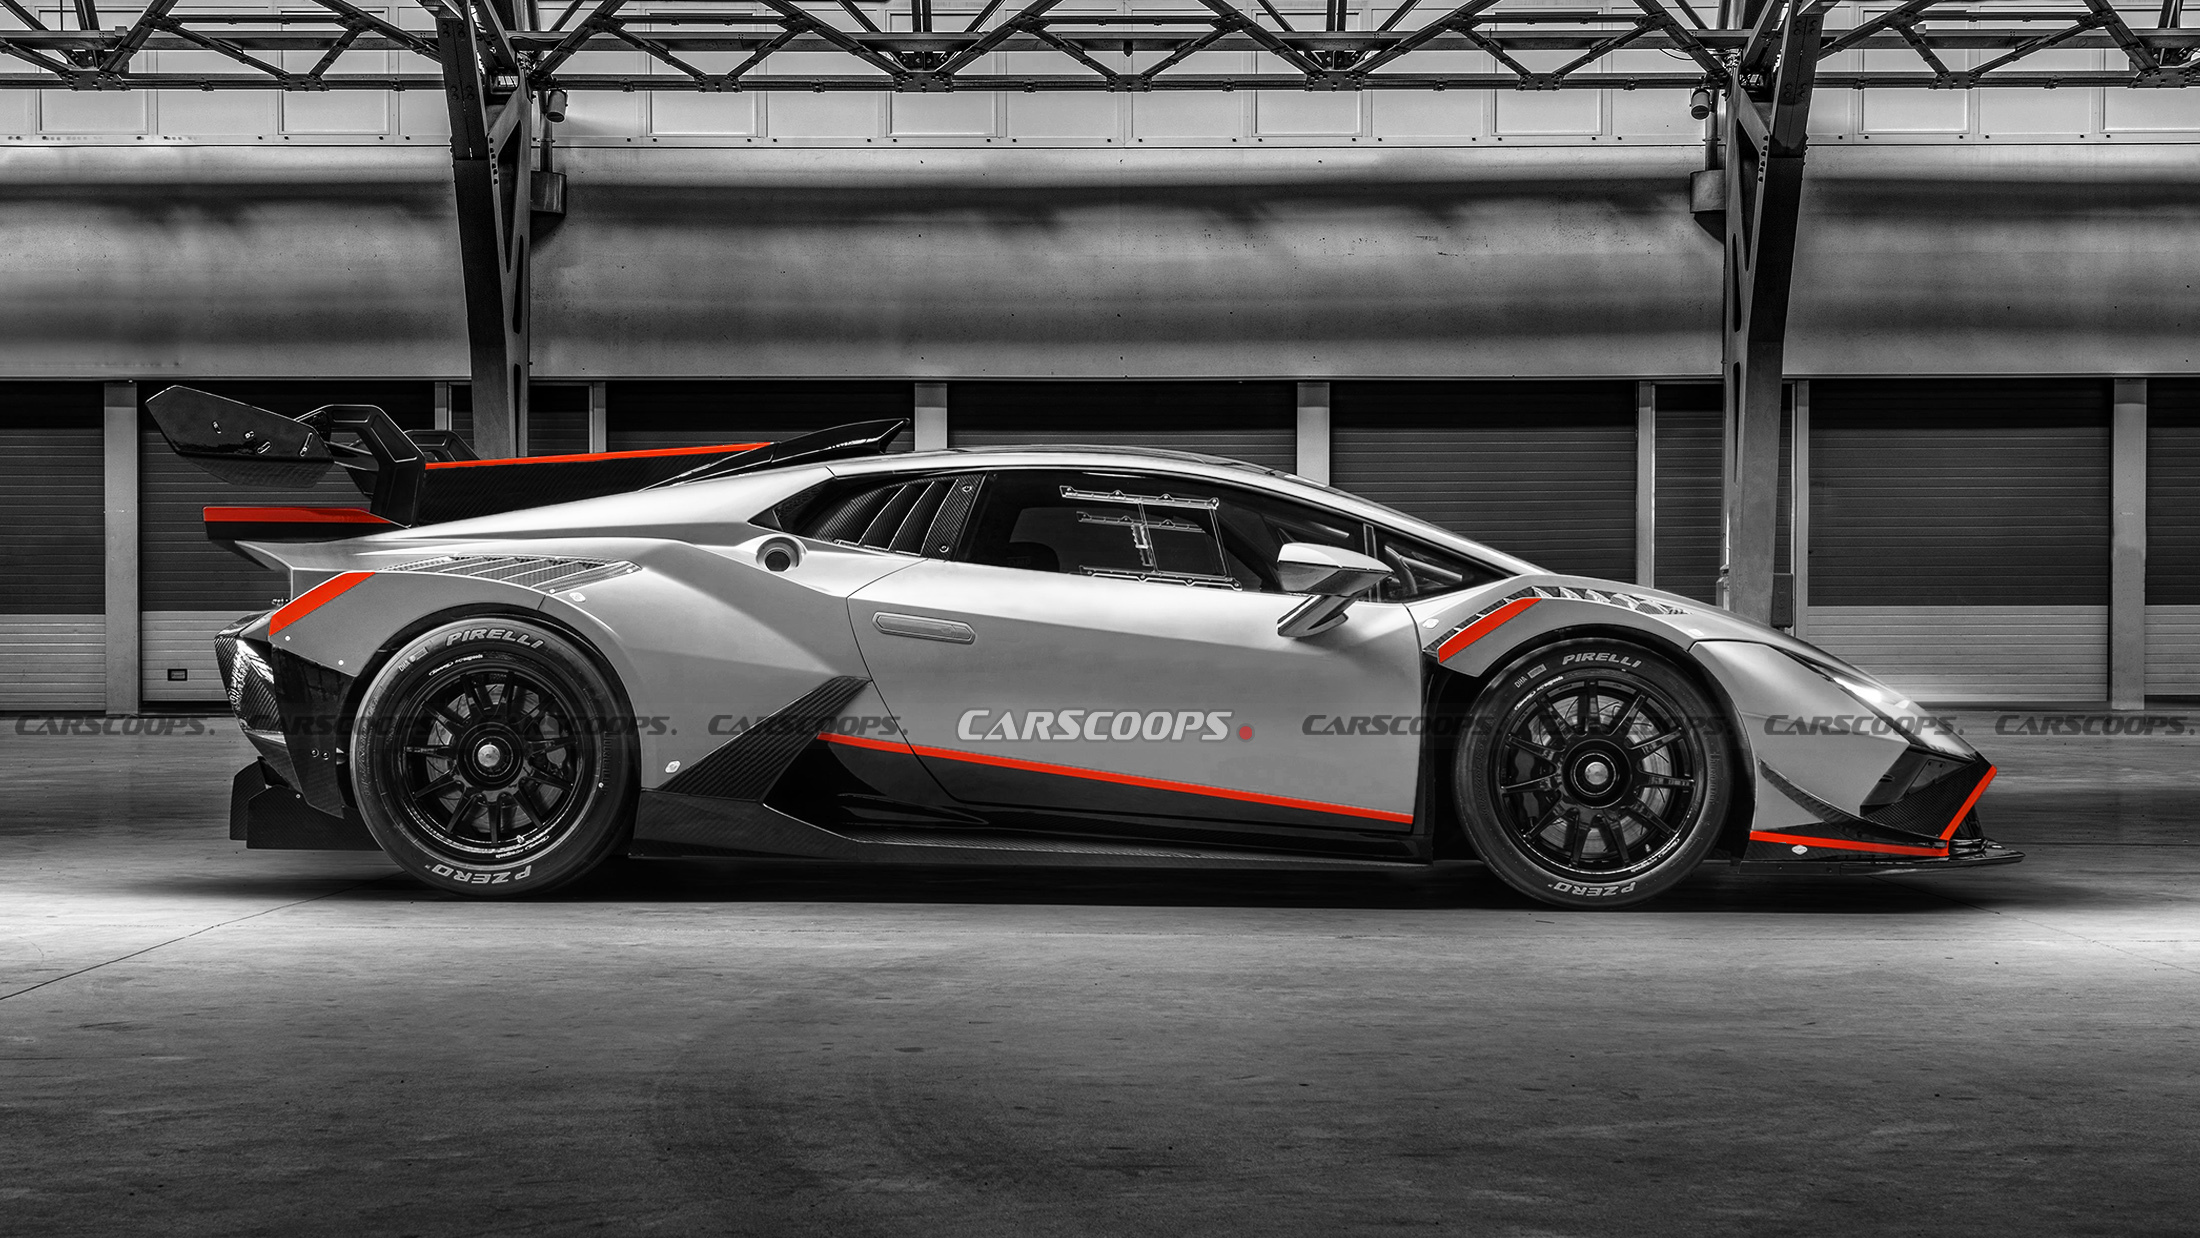 Speculation: Complete Allocation of 10 Lamborghini Huracan STJ Supercars Sold Out